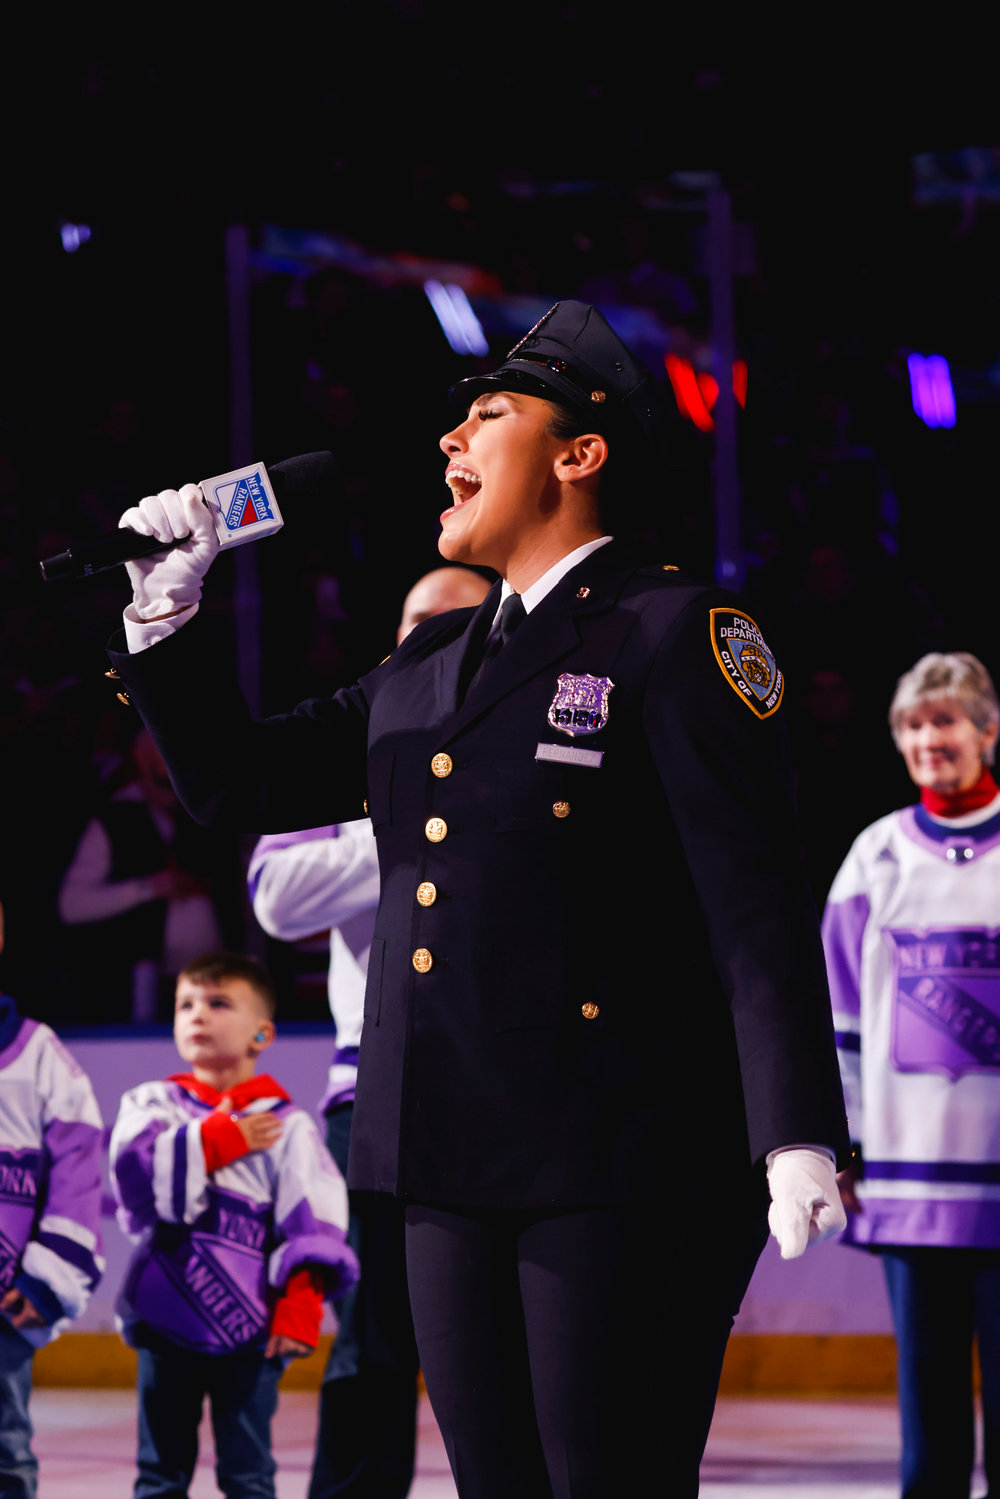 NYPD officer Brianna Fernandez sang a stunning rendition of the ‘Star-Spangled Banner’ to kick off the New York Rangers game Nov. 28.